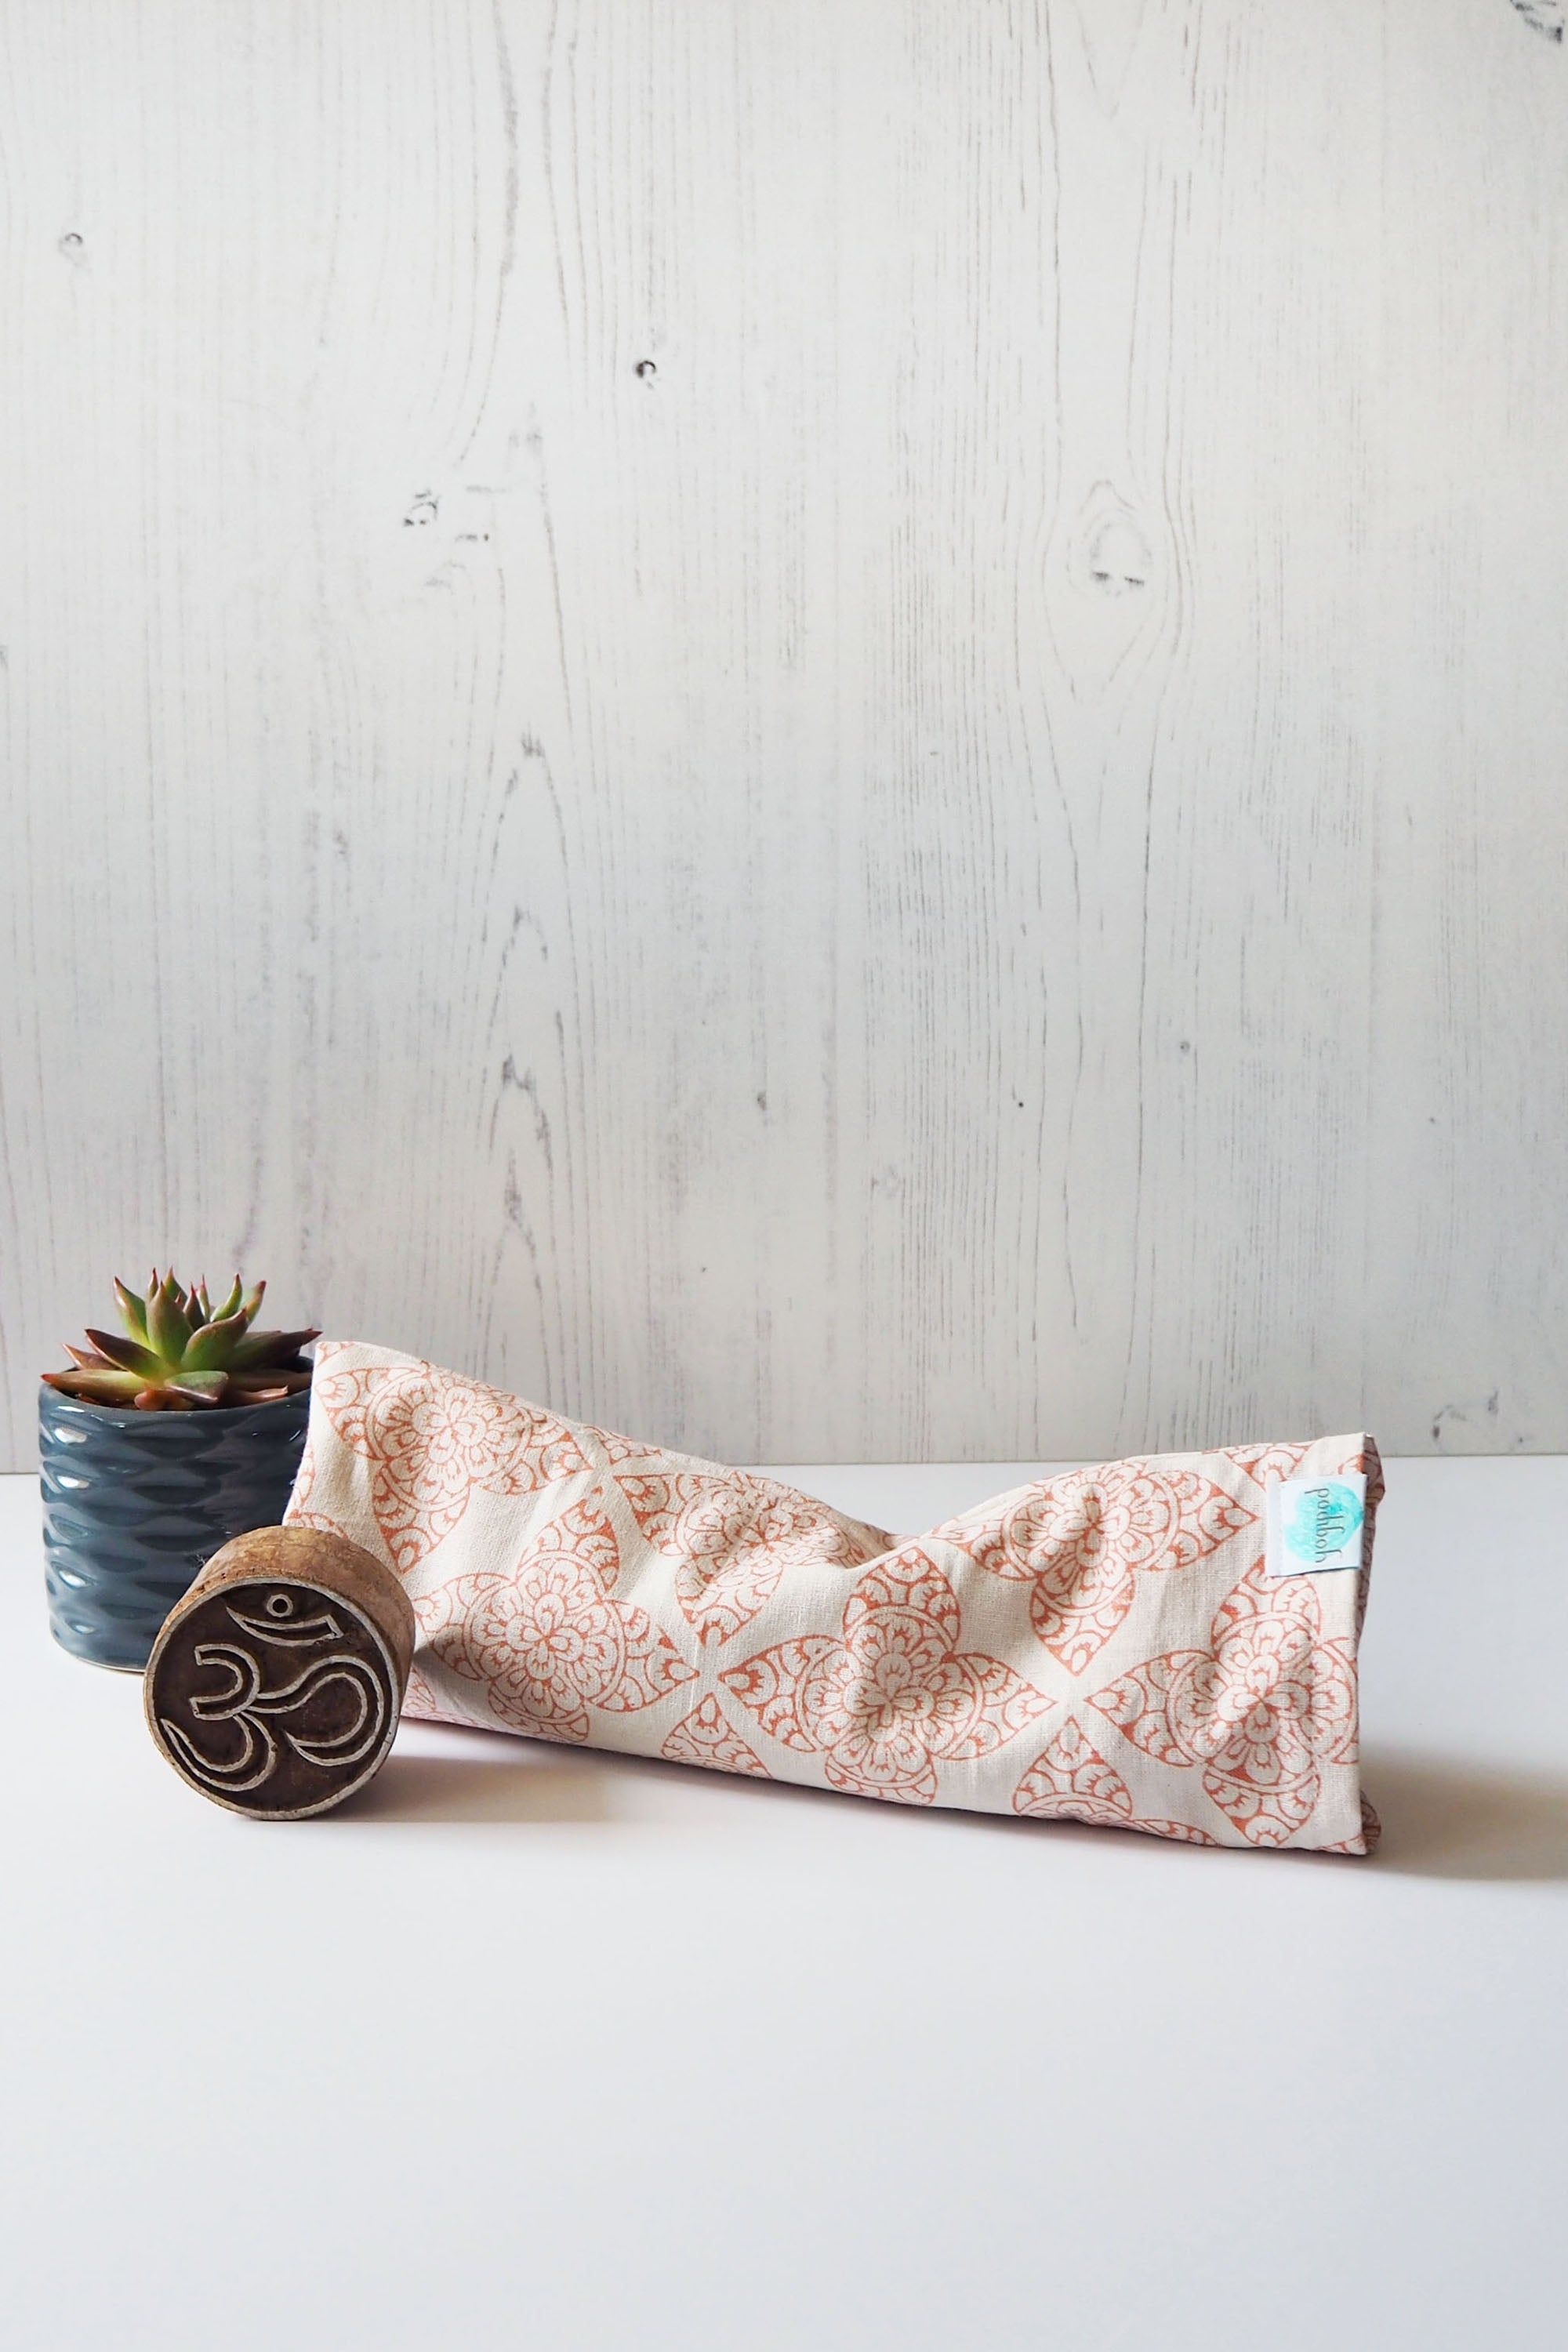 Handcrafted eye pillow from Yogi Pod, designed to enhance relaxation. Created in the UK with hand block printed cotton from Rajasthan. Linseed-filled and customizable with calming oils. Versatile for yoga or as decorative and functional home accessories."